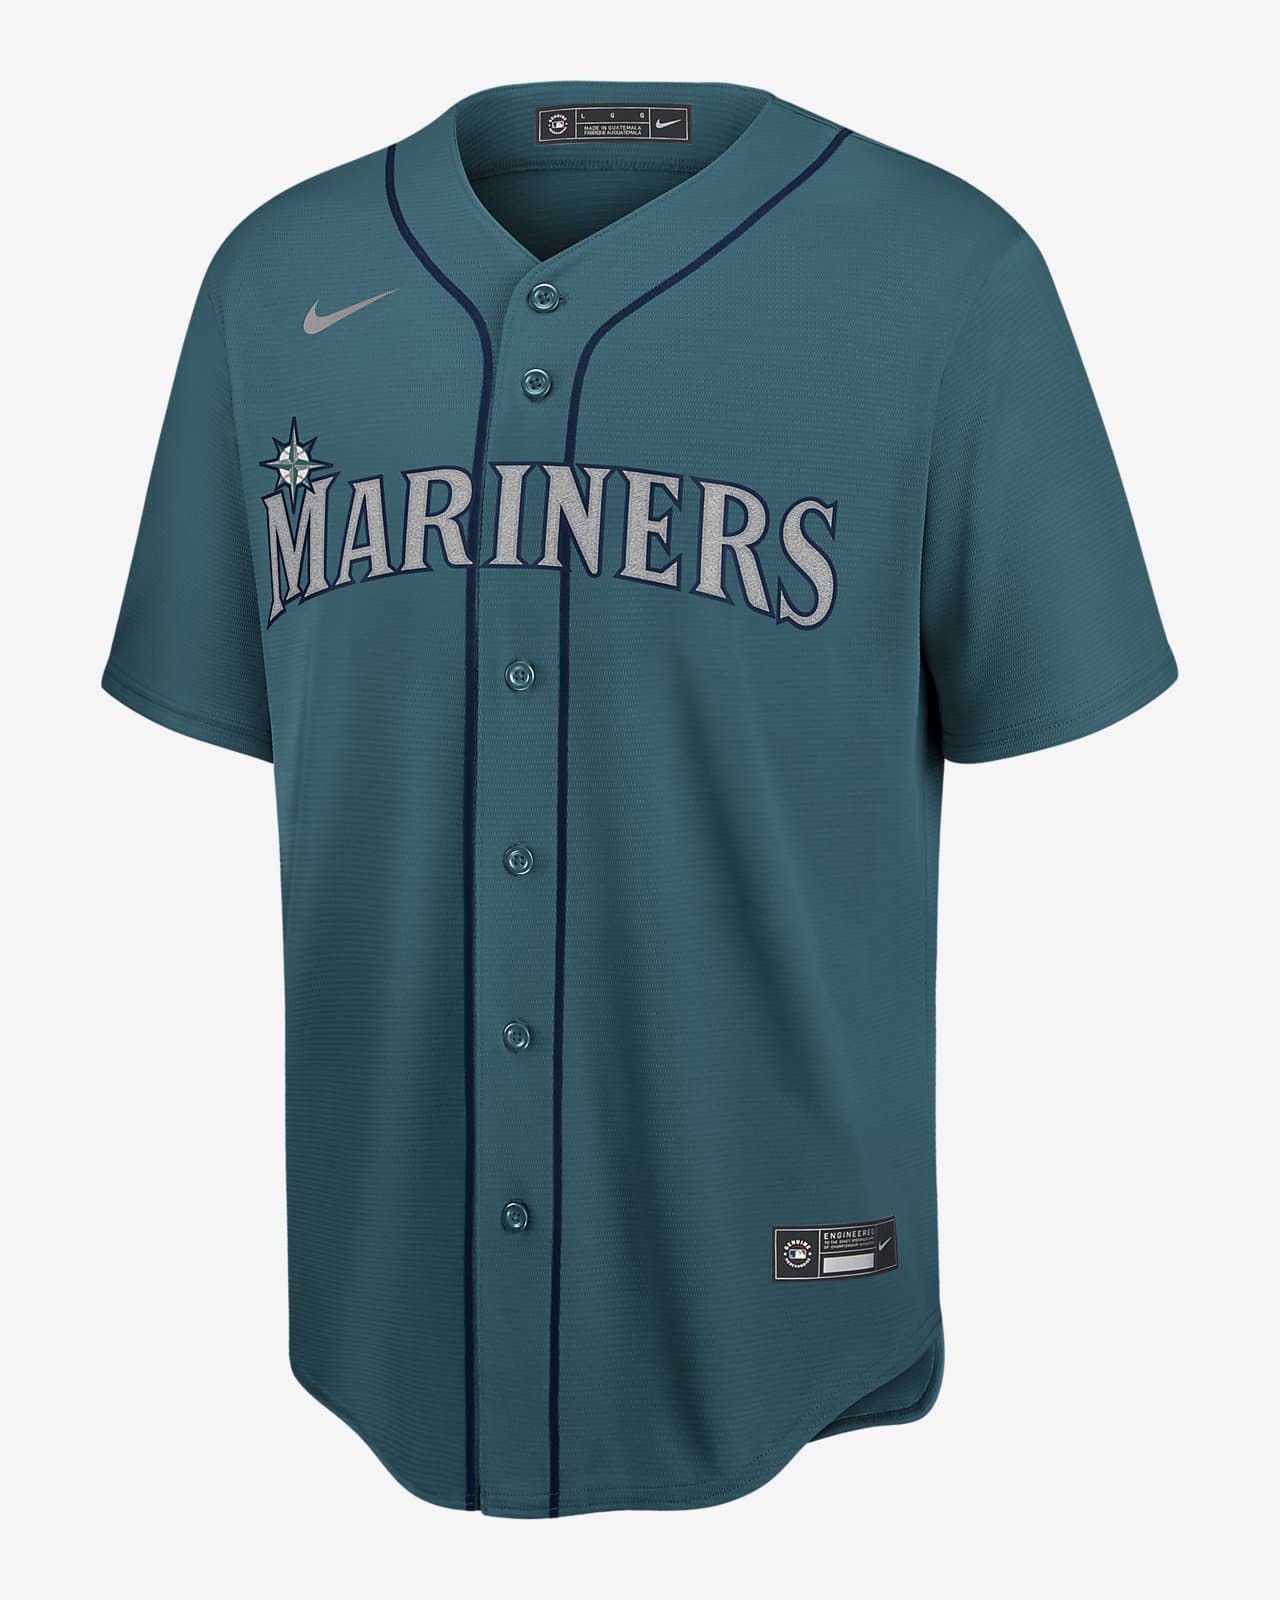 mariners teal color